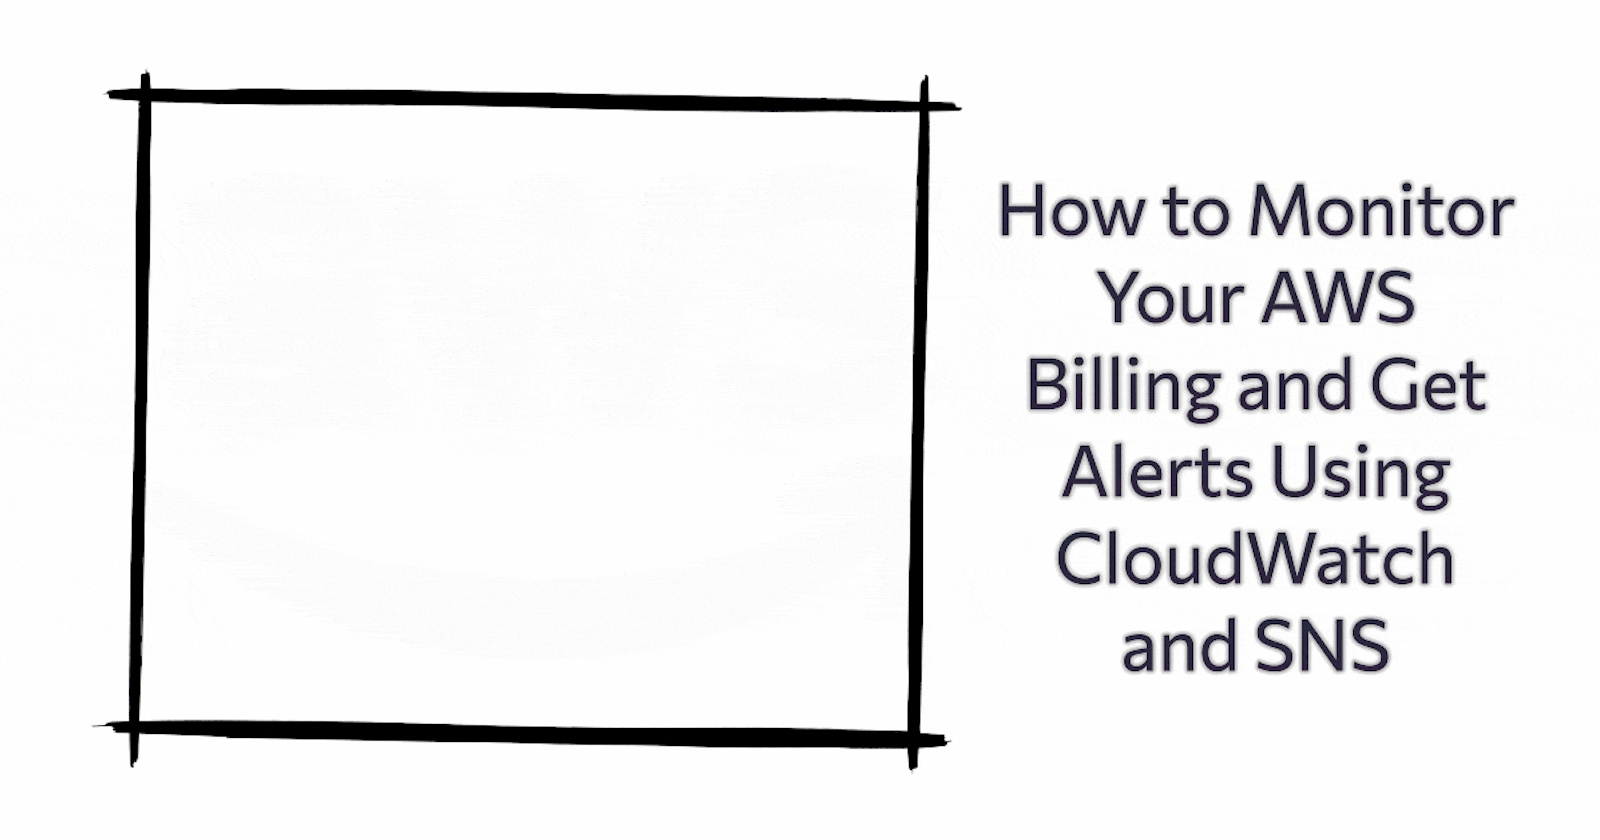 How to Monitor Your AWS Billing and Get Alerts Using CloudWatch and SNS 🚨